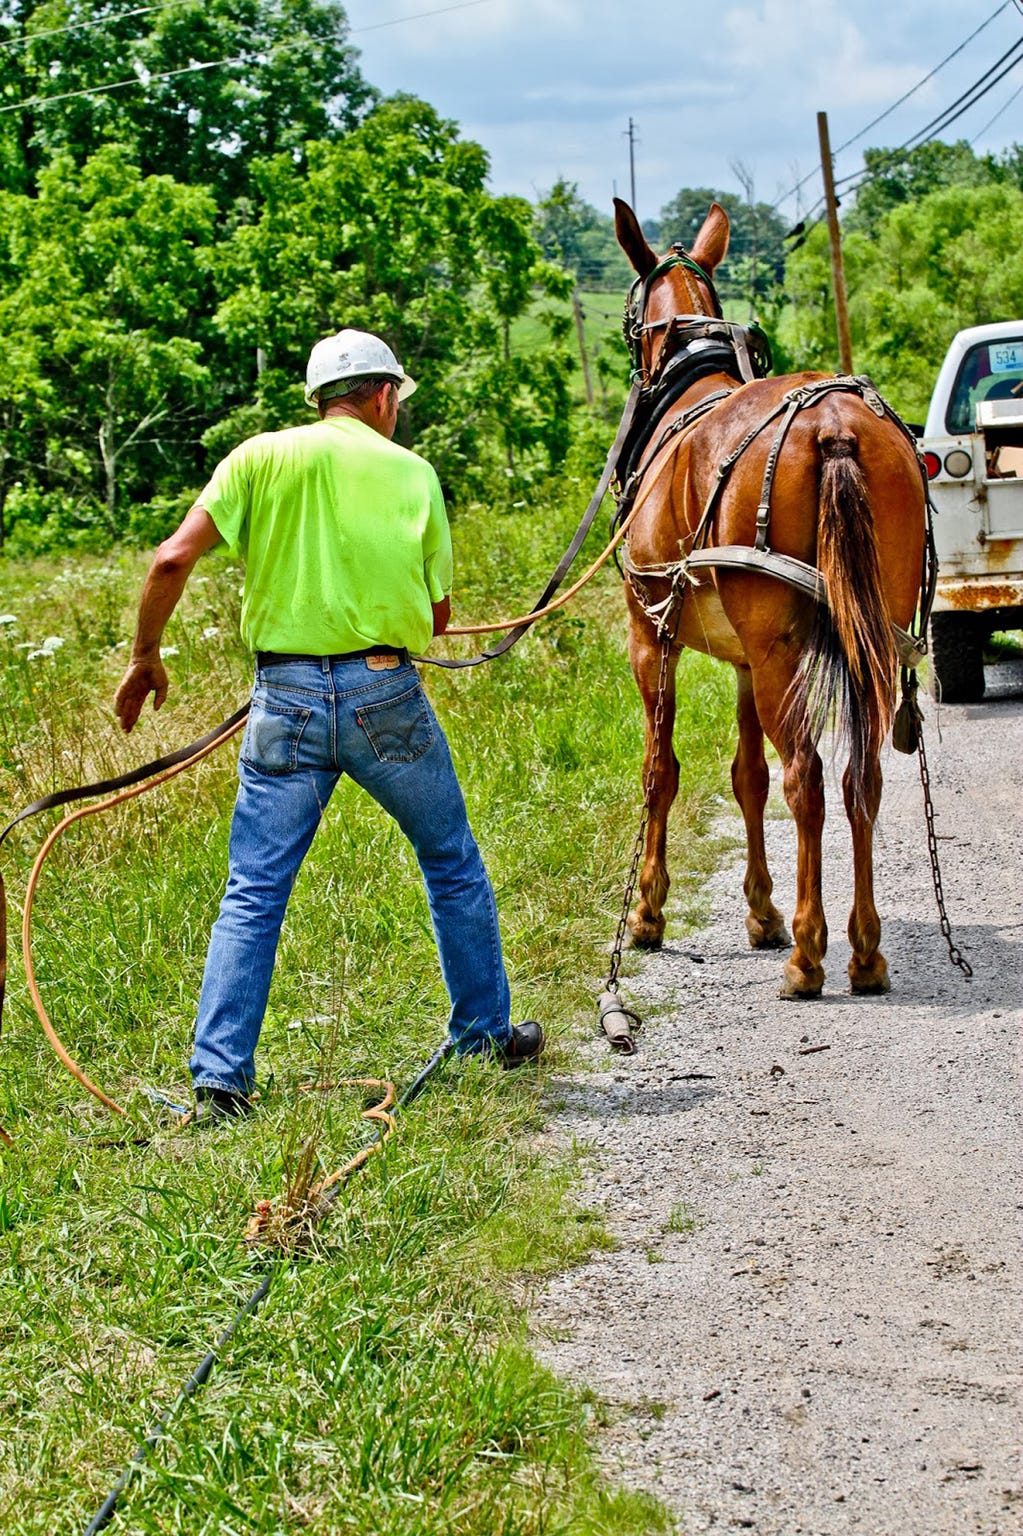 The Peoples Rural Telephone Cooperative hired R.C. Hibbitts and his mule, "Old Bub," to help string fiber-optic cable in the most rugged areas of eastern Kentucky’s Jackson and Owsley counties.